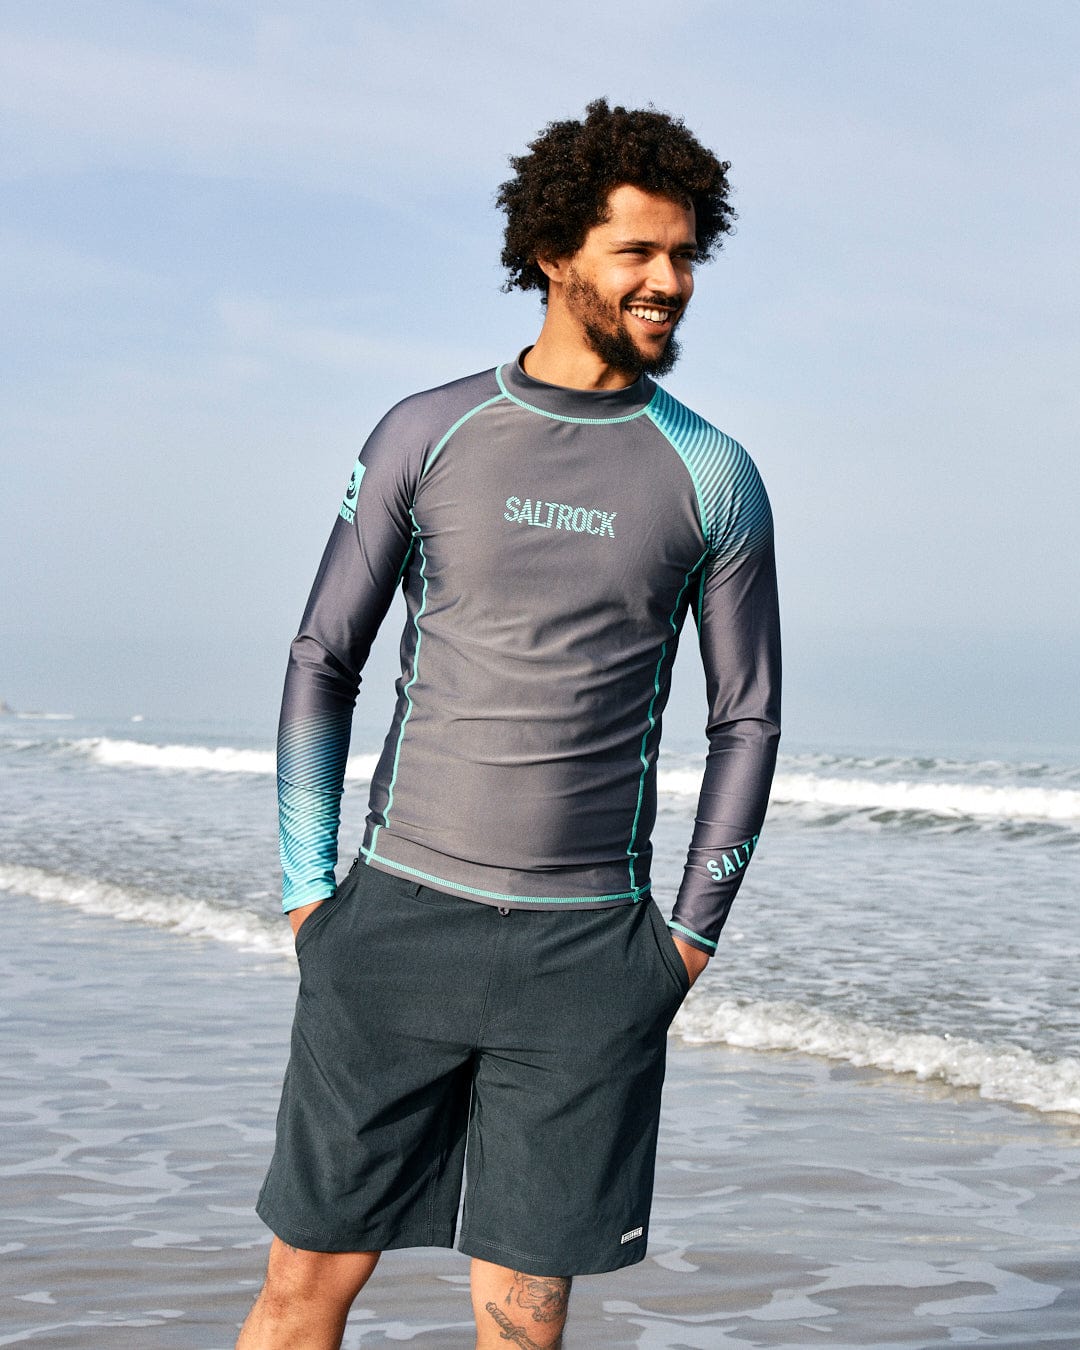 Man with curly hair smiling at the beach, wearing a gray and teal Saltrock DNA Wave - Mens Long Sleeve Rashvest - Grey/Turquoise and black shorts.